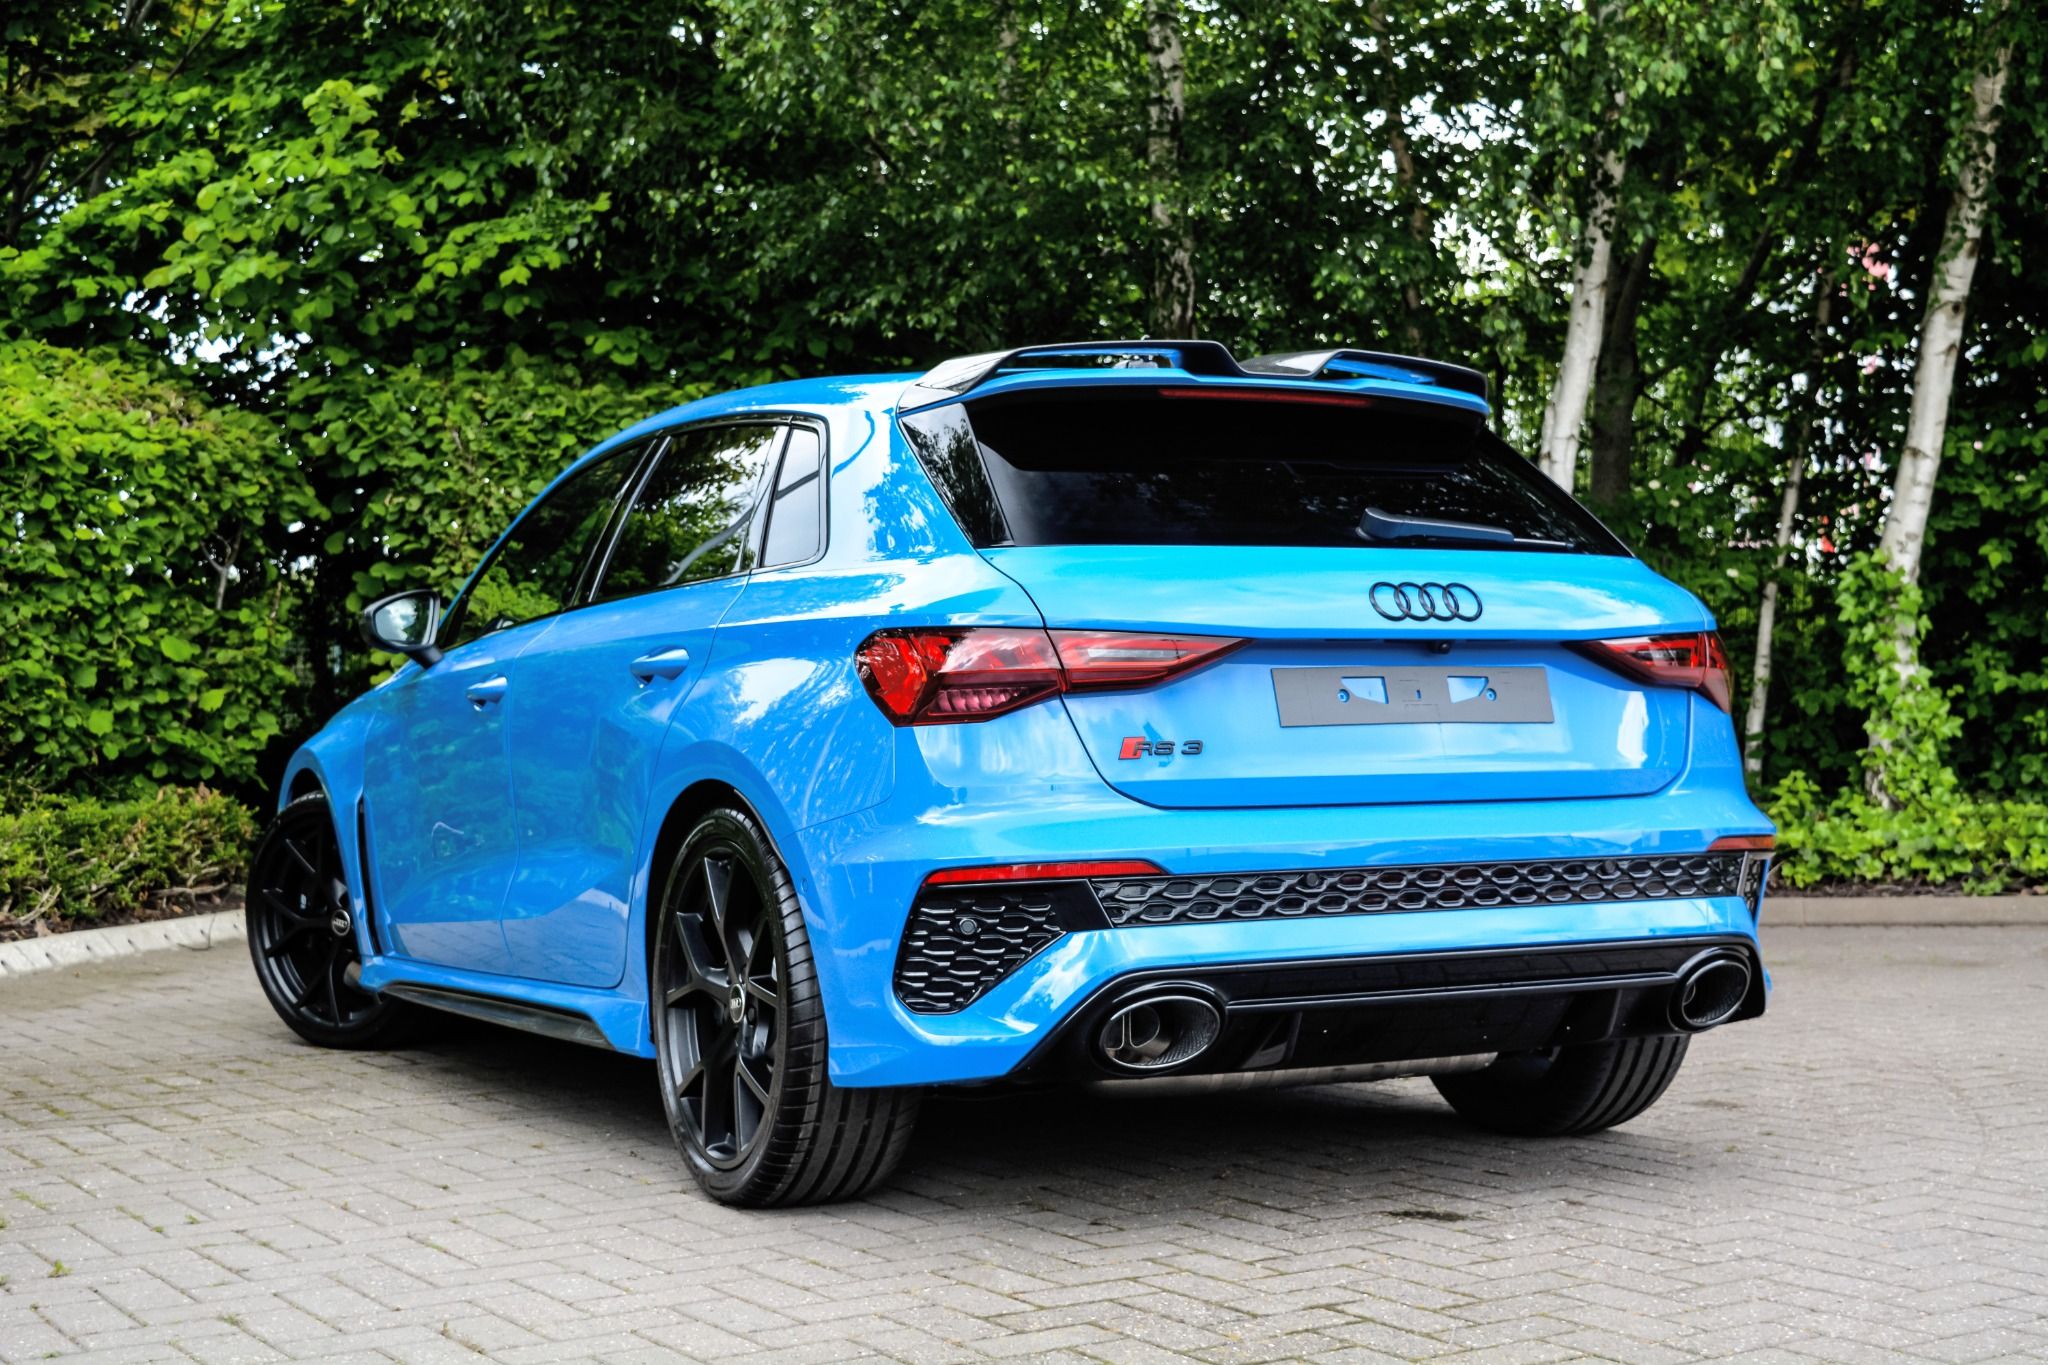 Rear of Blue Audi RS3 in front of trees